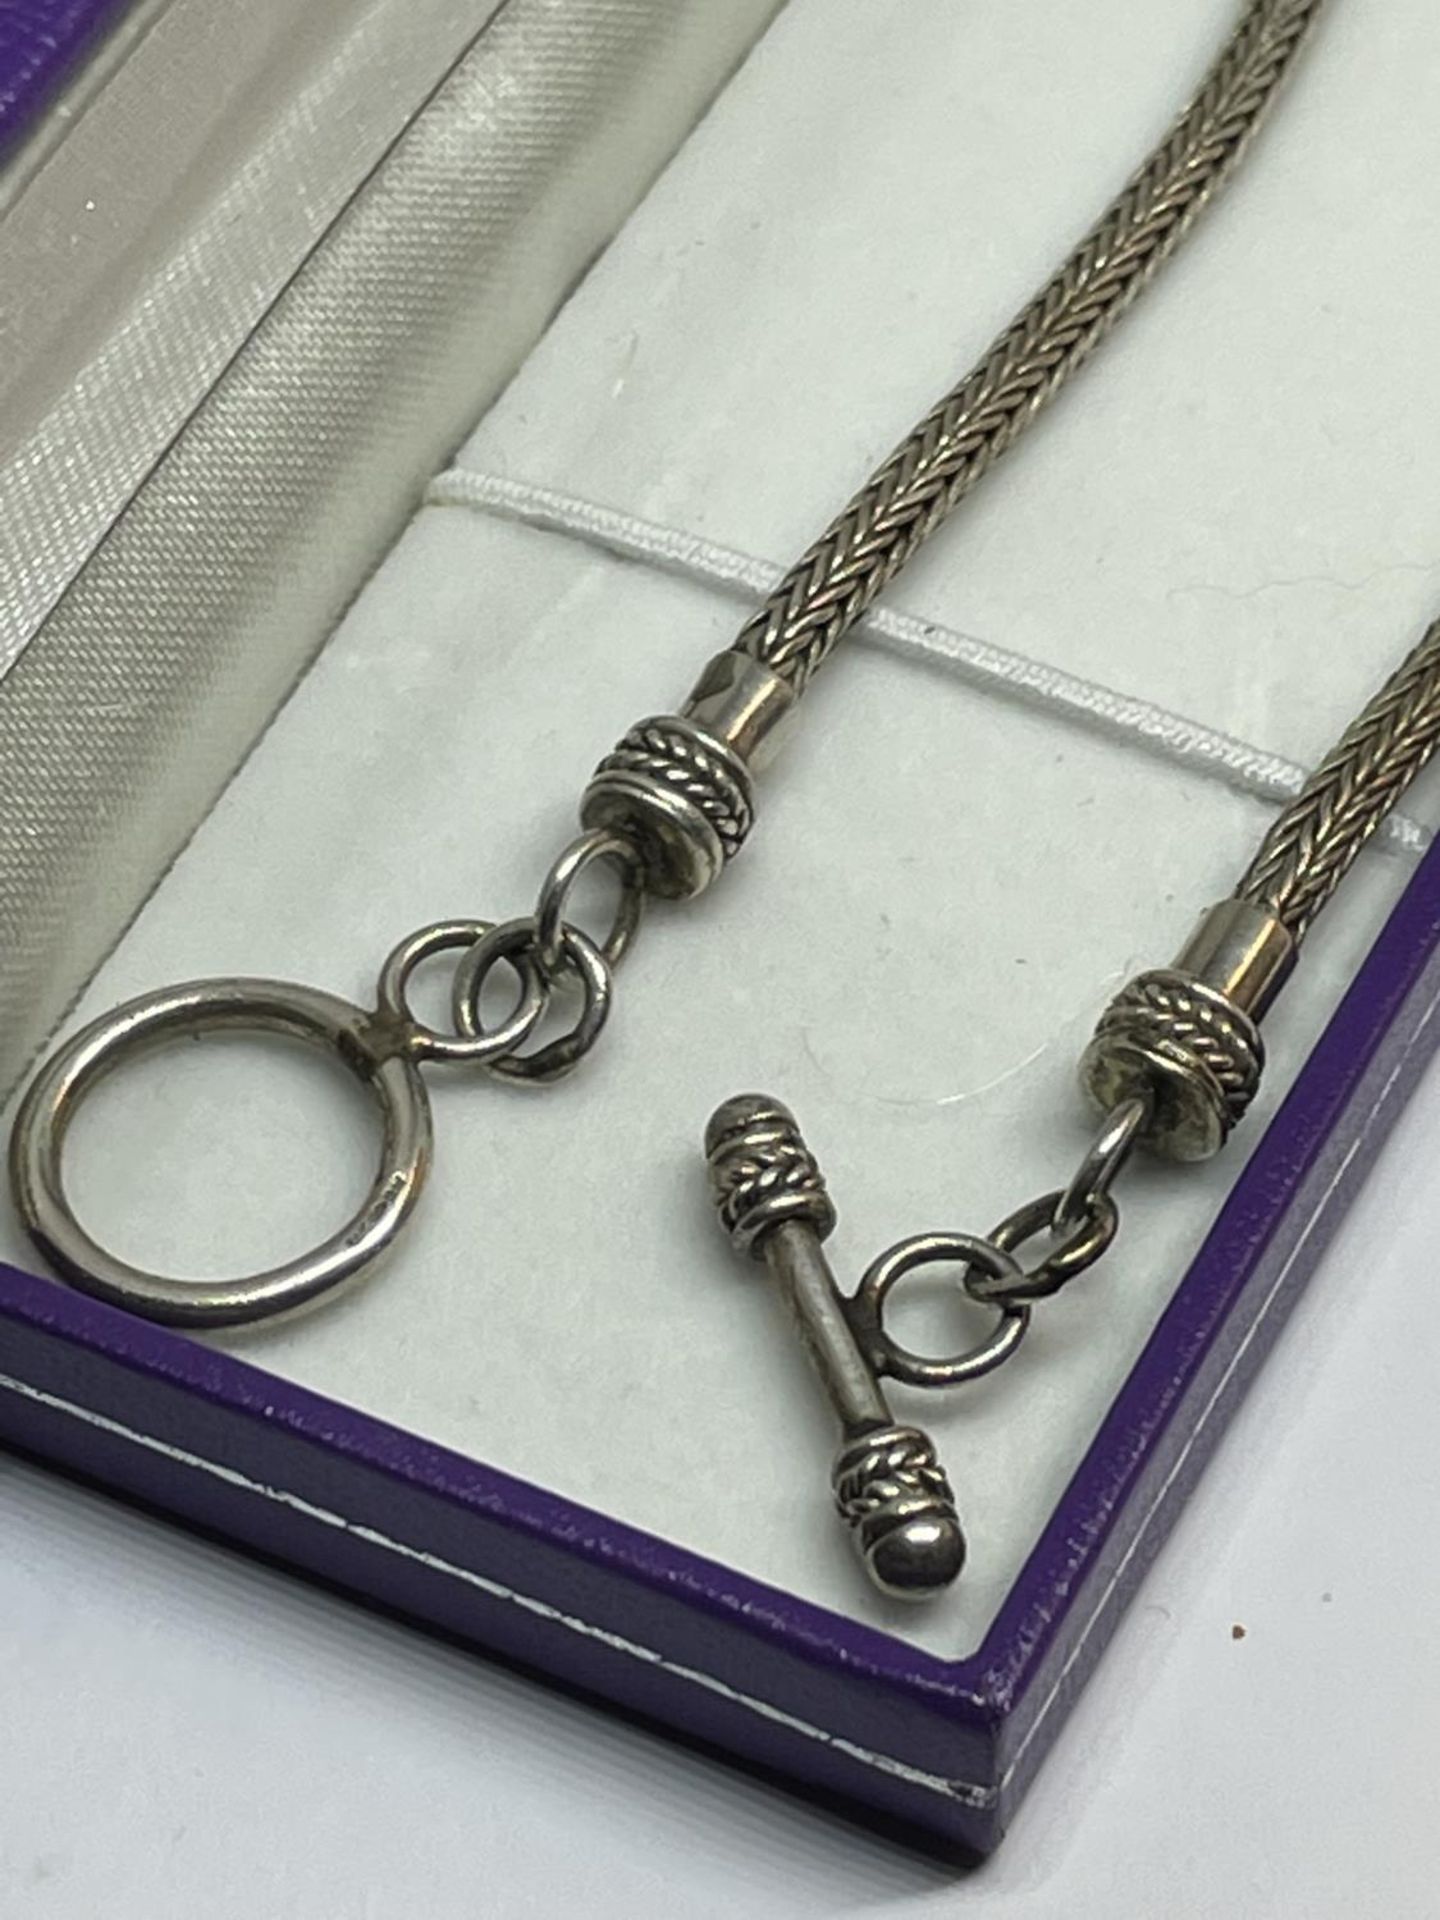 A MARKED SILVER T BAR NECKLACE IN A PRESENTATION BOX - Image 3 of 3